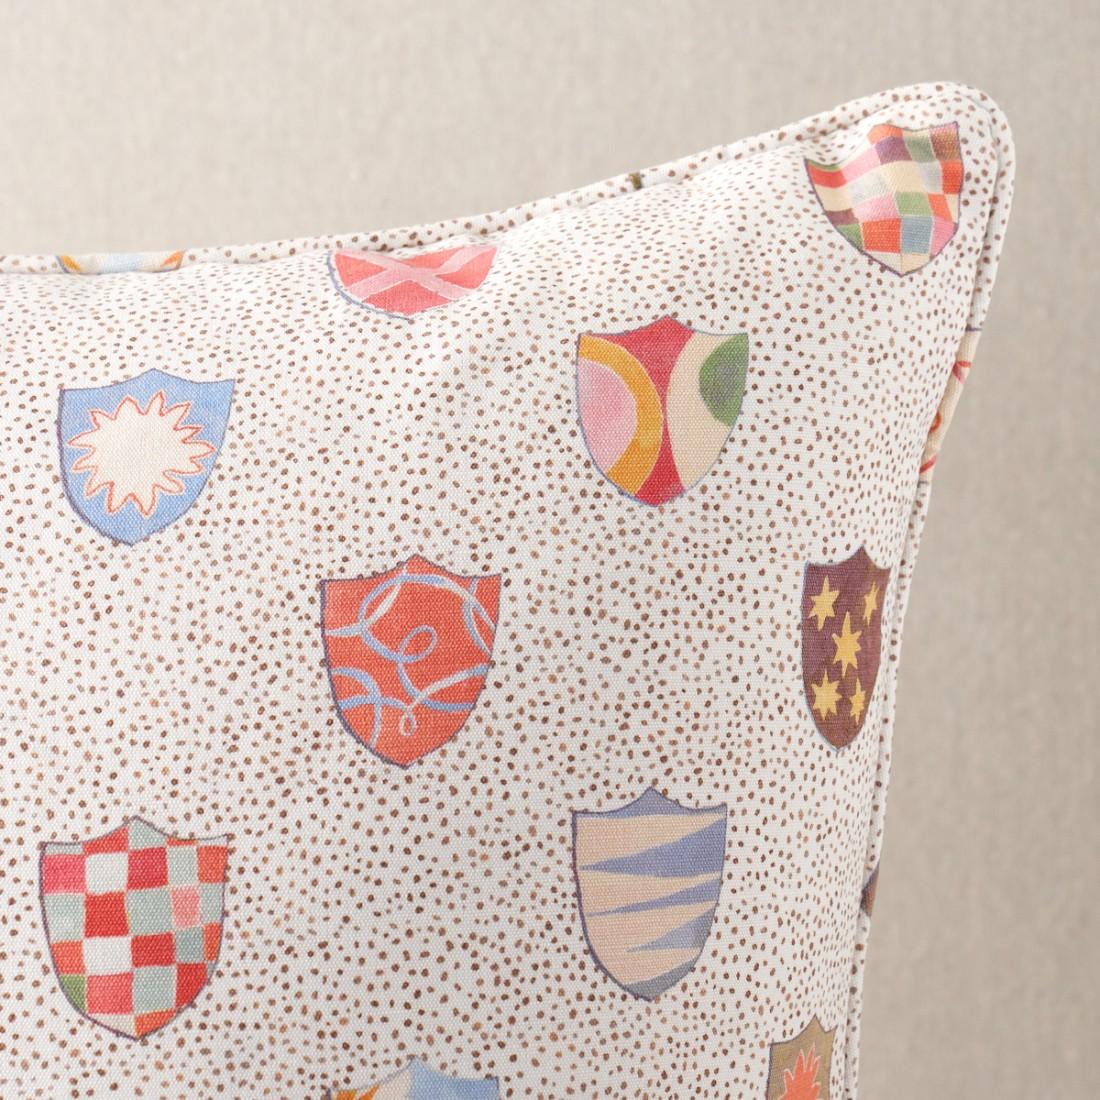 This pillow features Heraldic by Happy Menocal for Schumacher with a self-welt finish. A delightful small-scale print by Happy Menocal, Heraldic breathes new life and levity into an ancient aristocratic motif. Colorful shields featuring whimsical